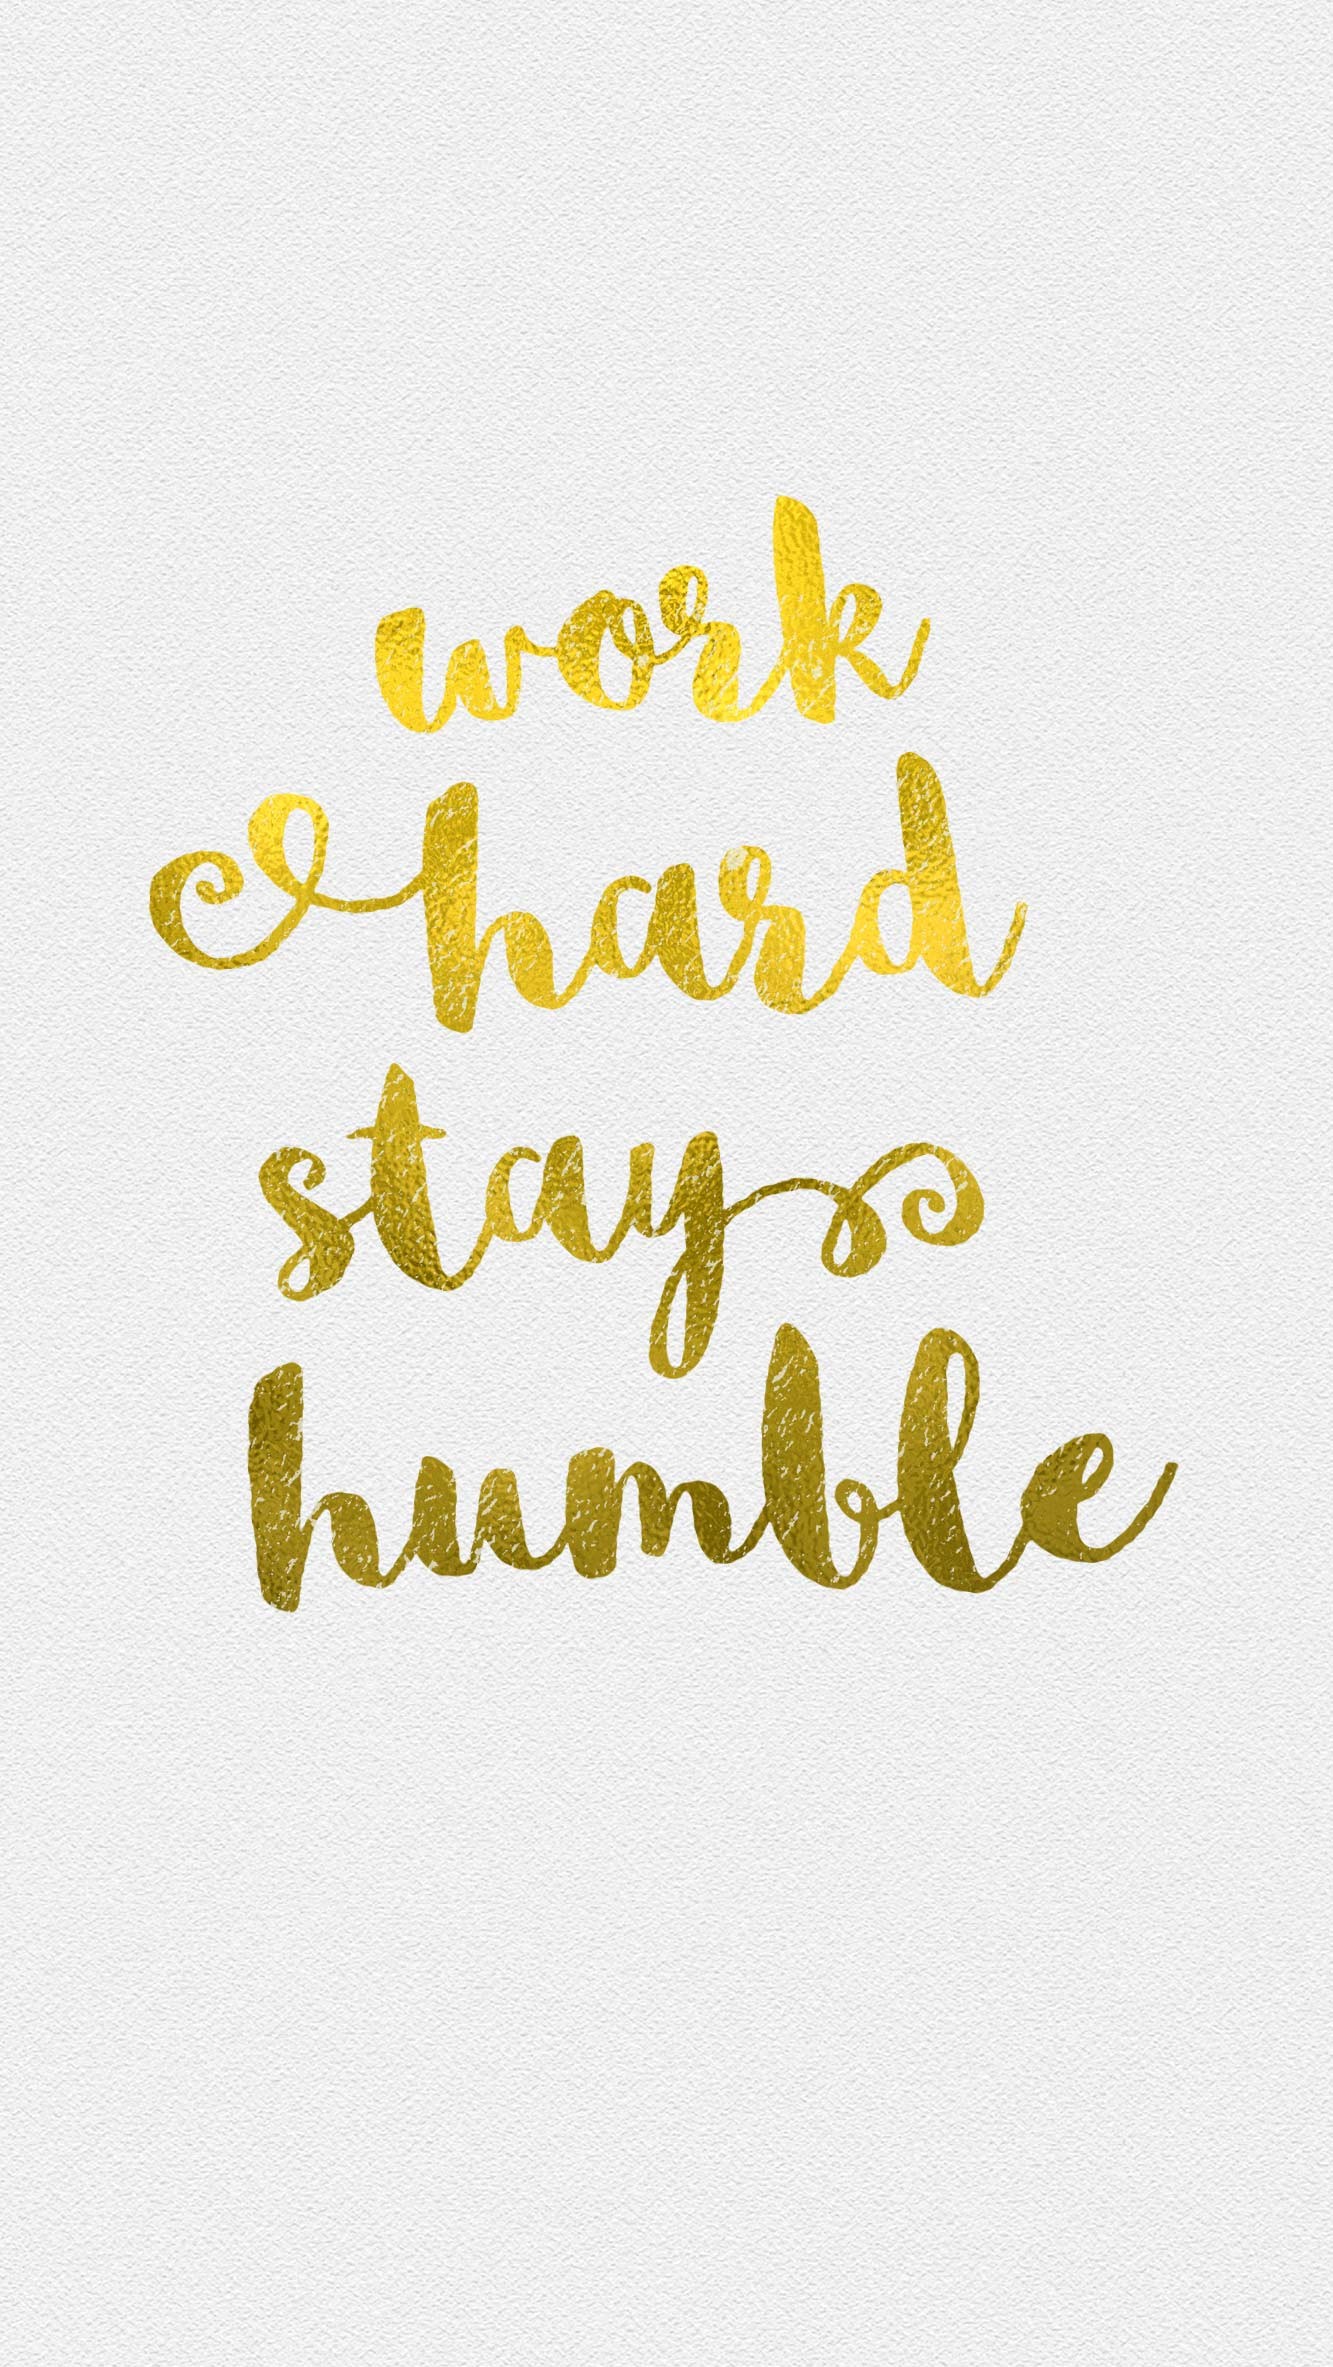 White gld Work Humble iphone wallpaper phone background lock screen quote me please Pinterest Screens, Wallpaper and Phone